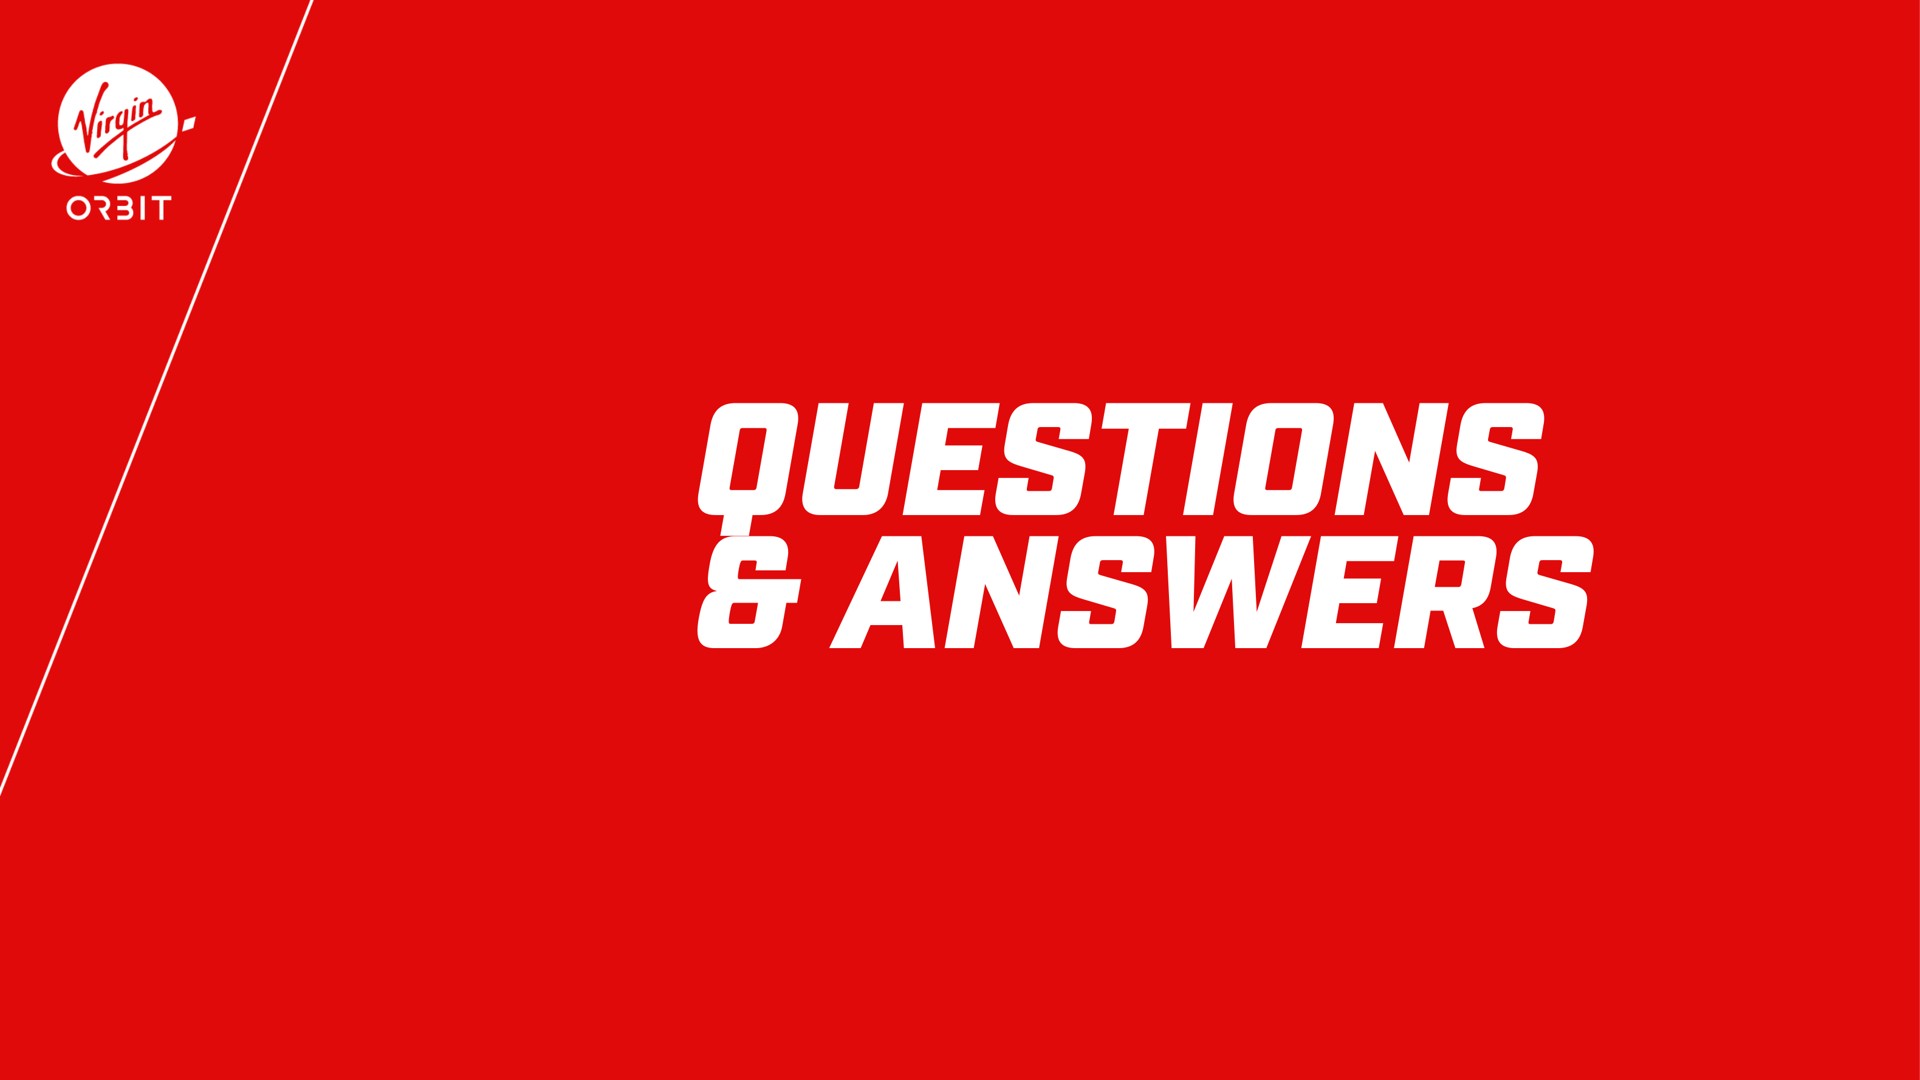 questions answers a a me at | Virgin Orbit